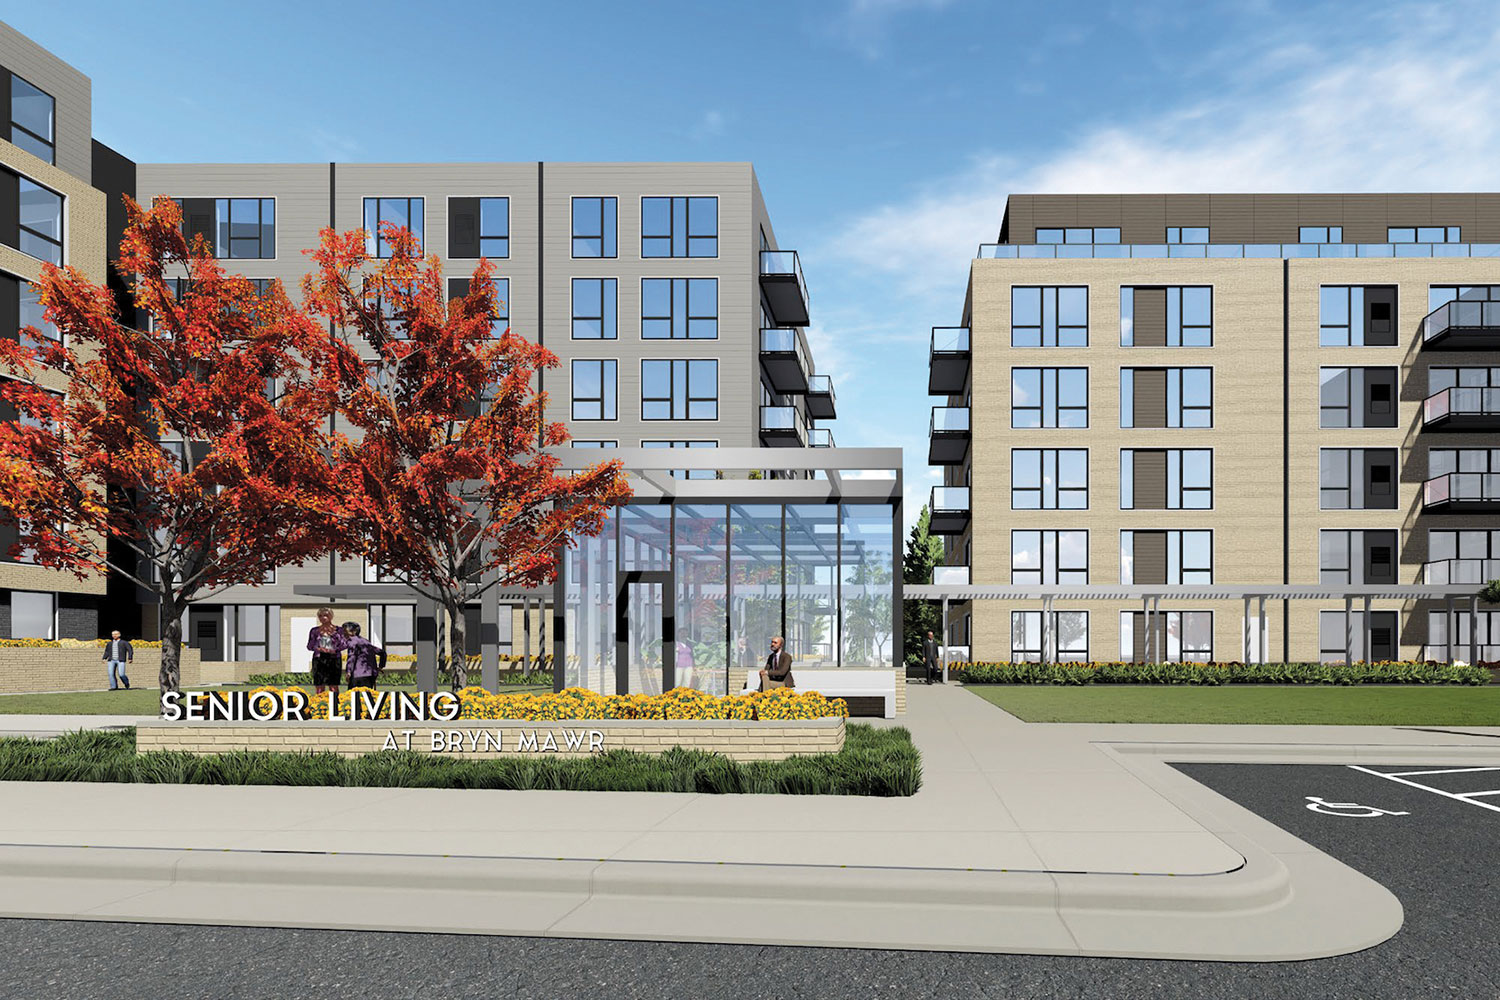 Lupe and Swervo Development’s Bryn Mawr project is all for seniors